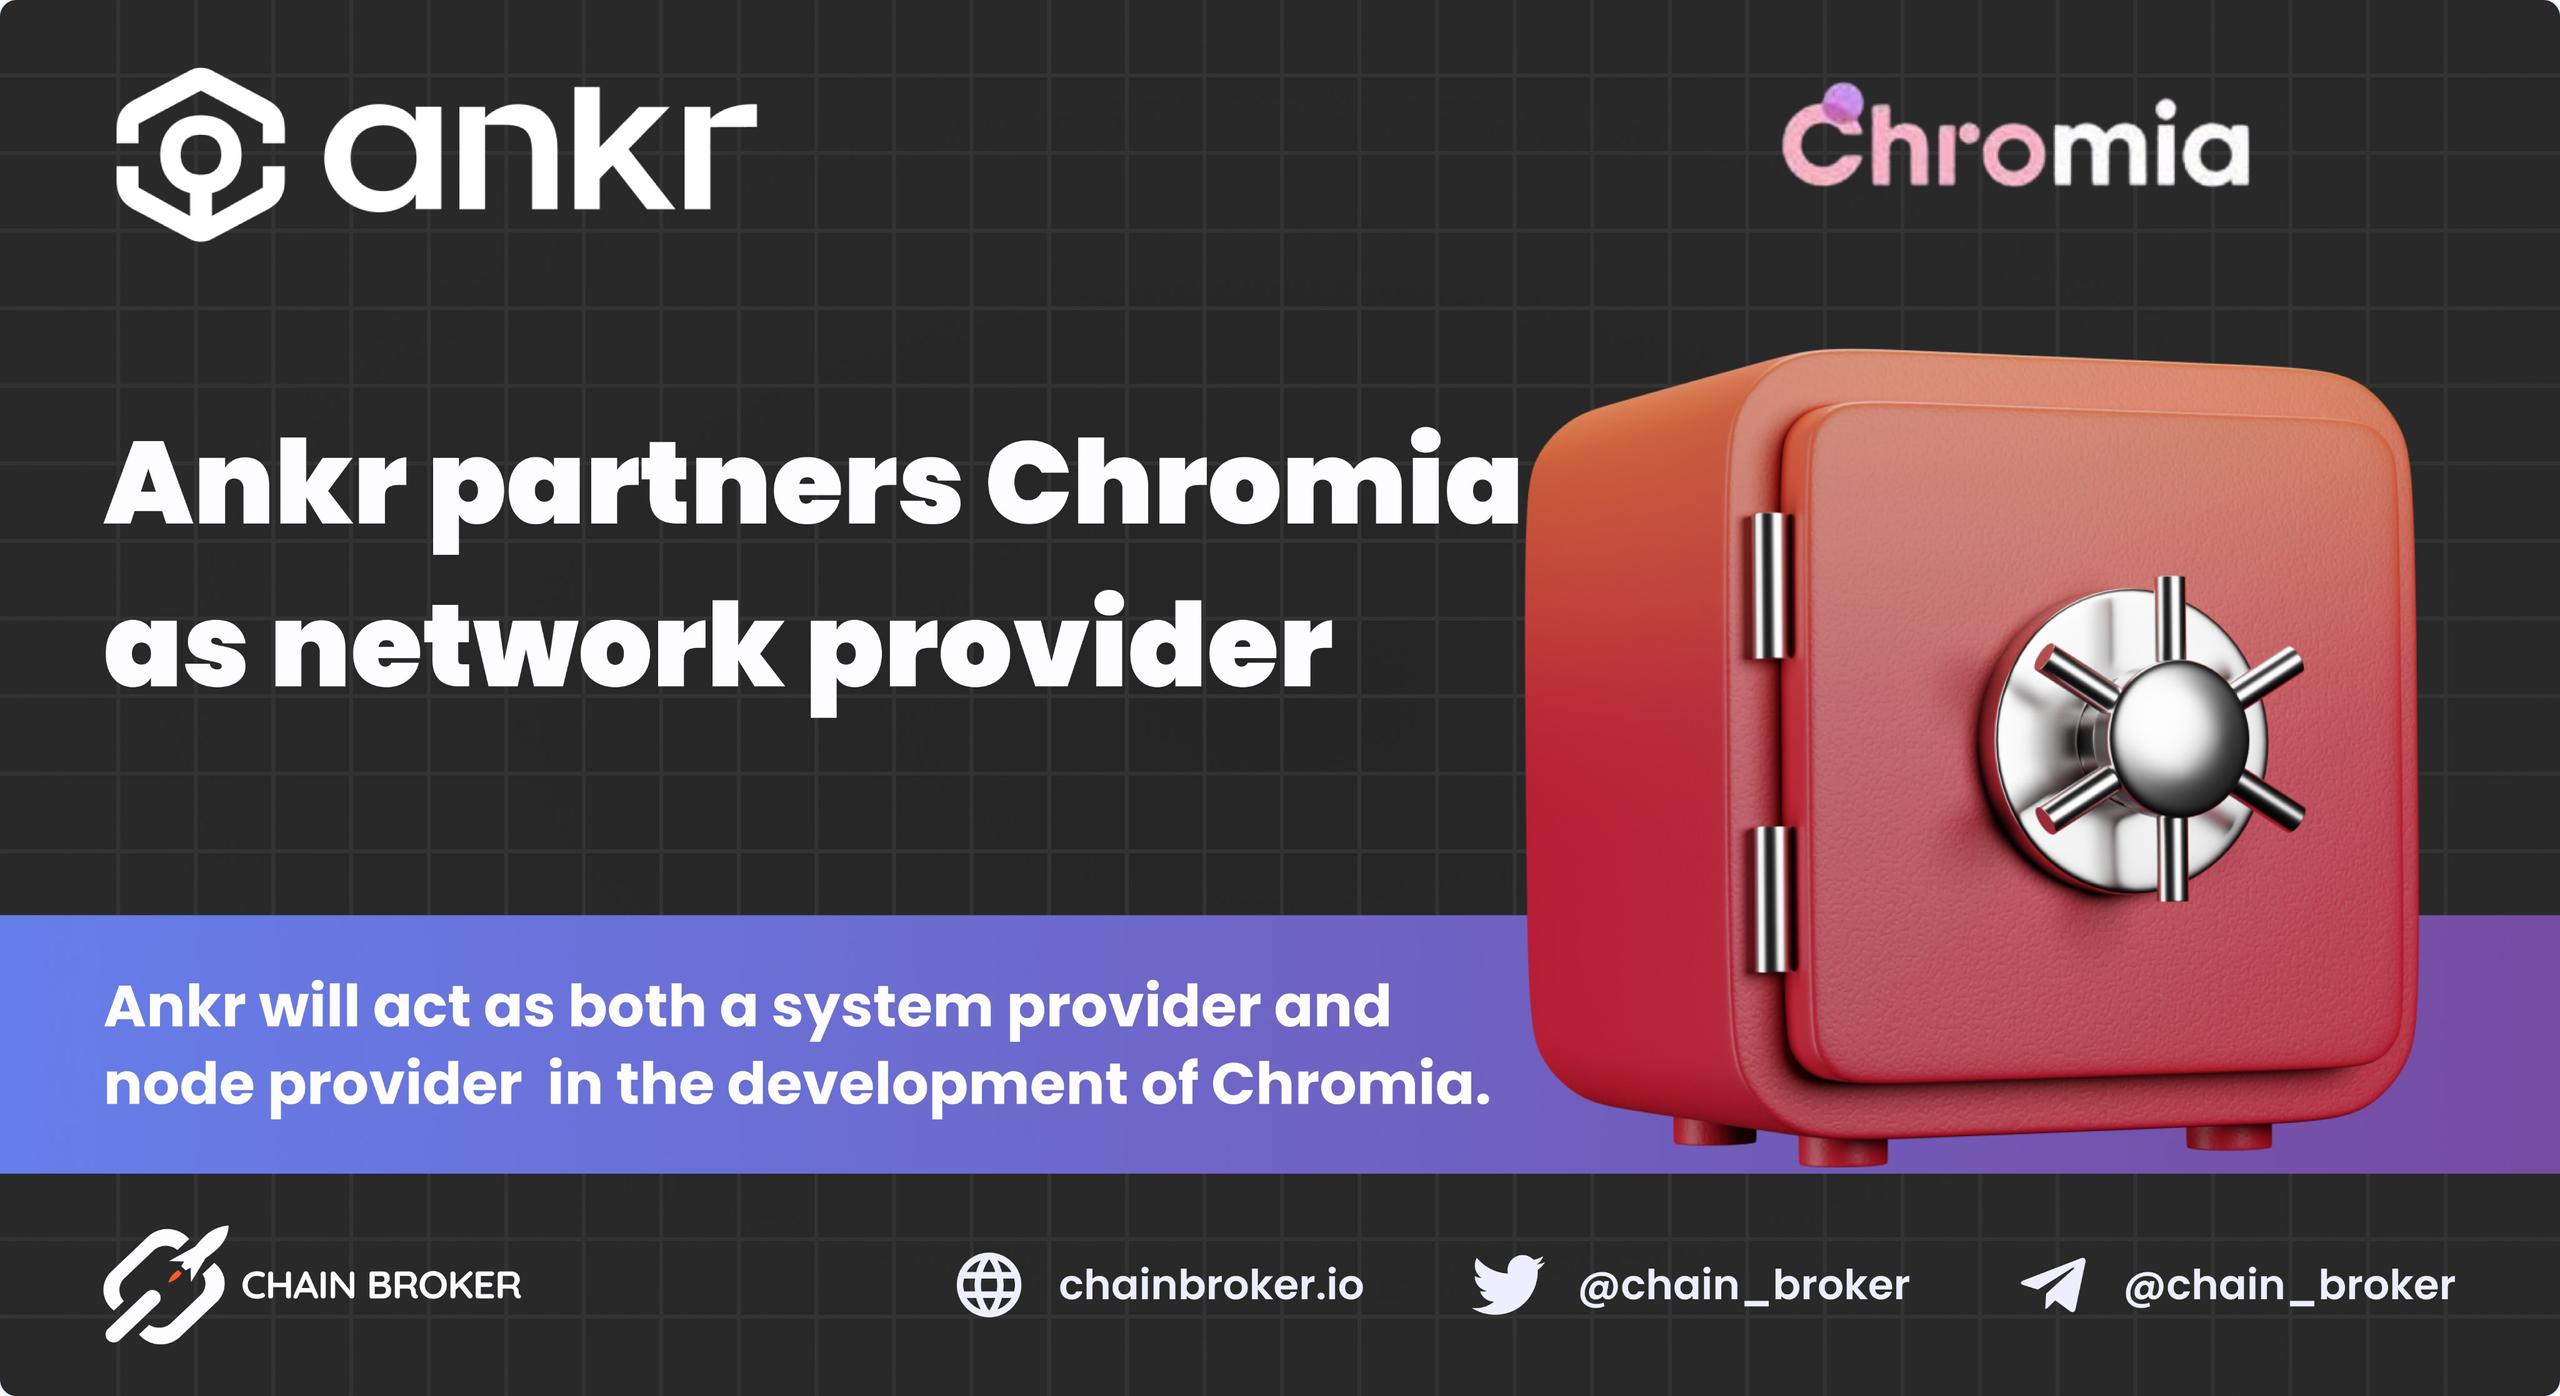 Ankr partners with Chromia as network provider